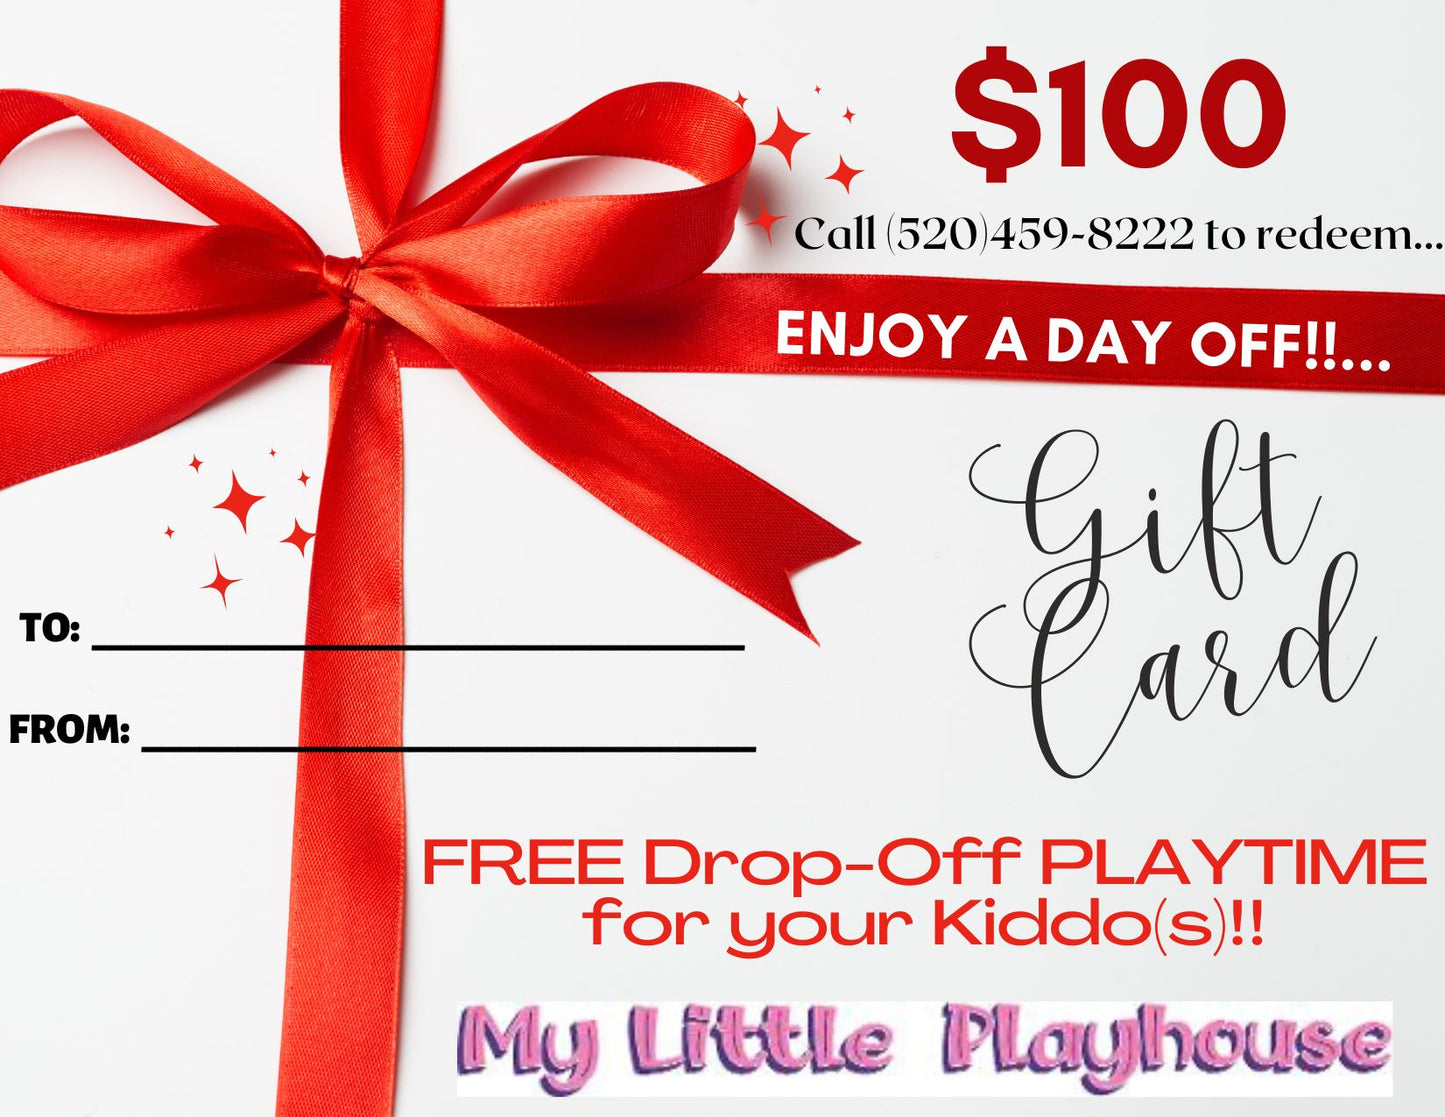 #001 - GIFT CARDS FOR MOM!! - FOR PLAYTIME/EVENTS at My Little Playhouse